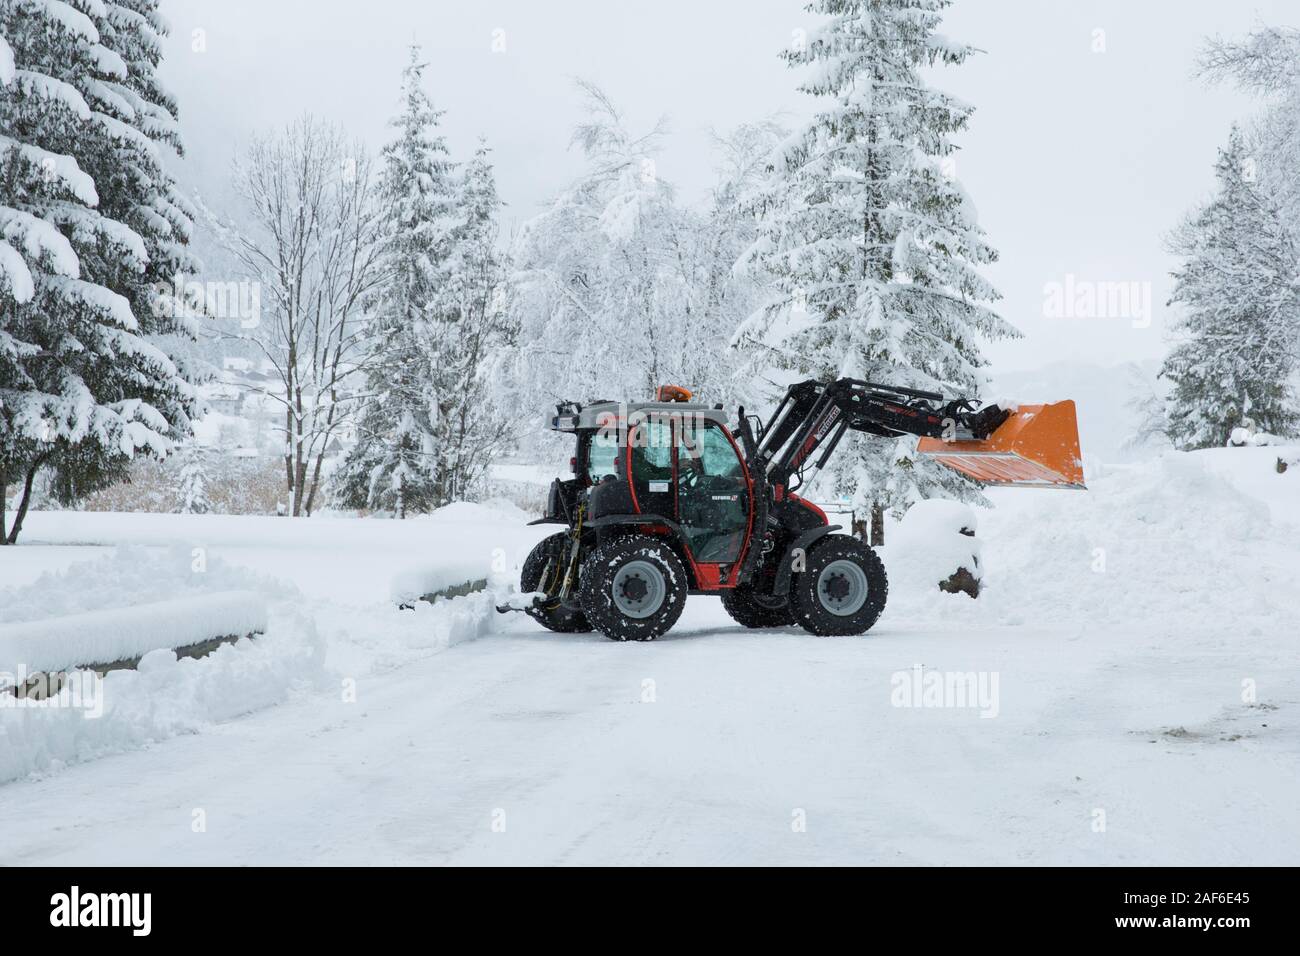 Tractor removing snow from the winter road.Large red tractor with snow plow grader clears snow covered road in mountains, Weissensee, Alps, Austria Stock Photo